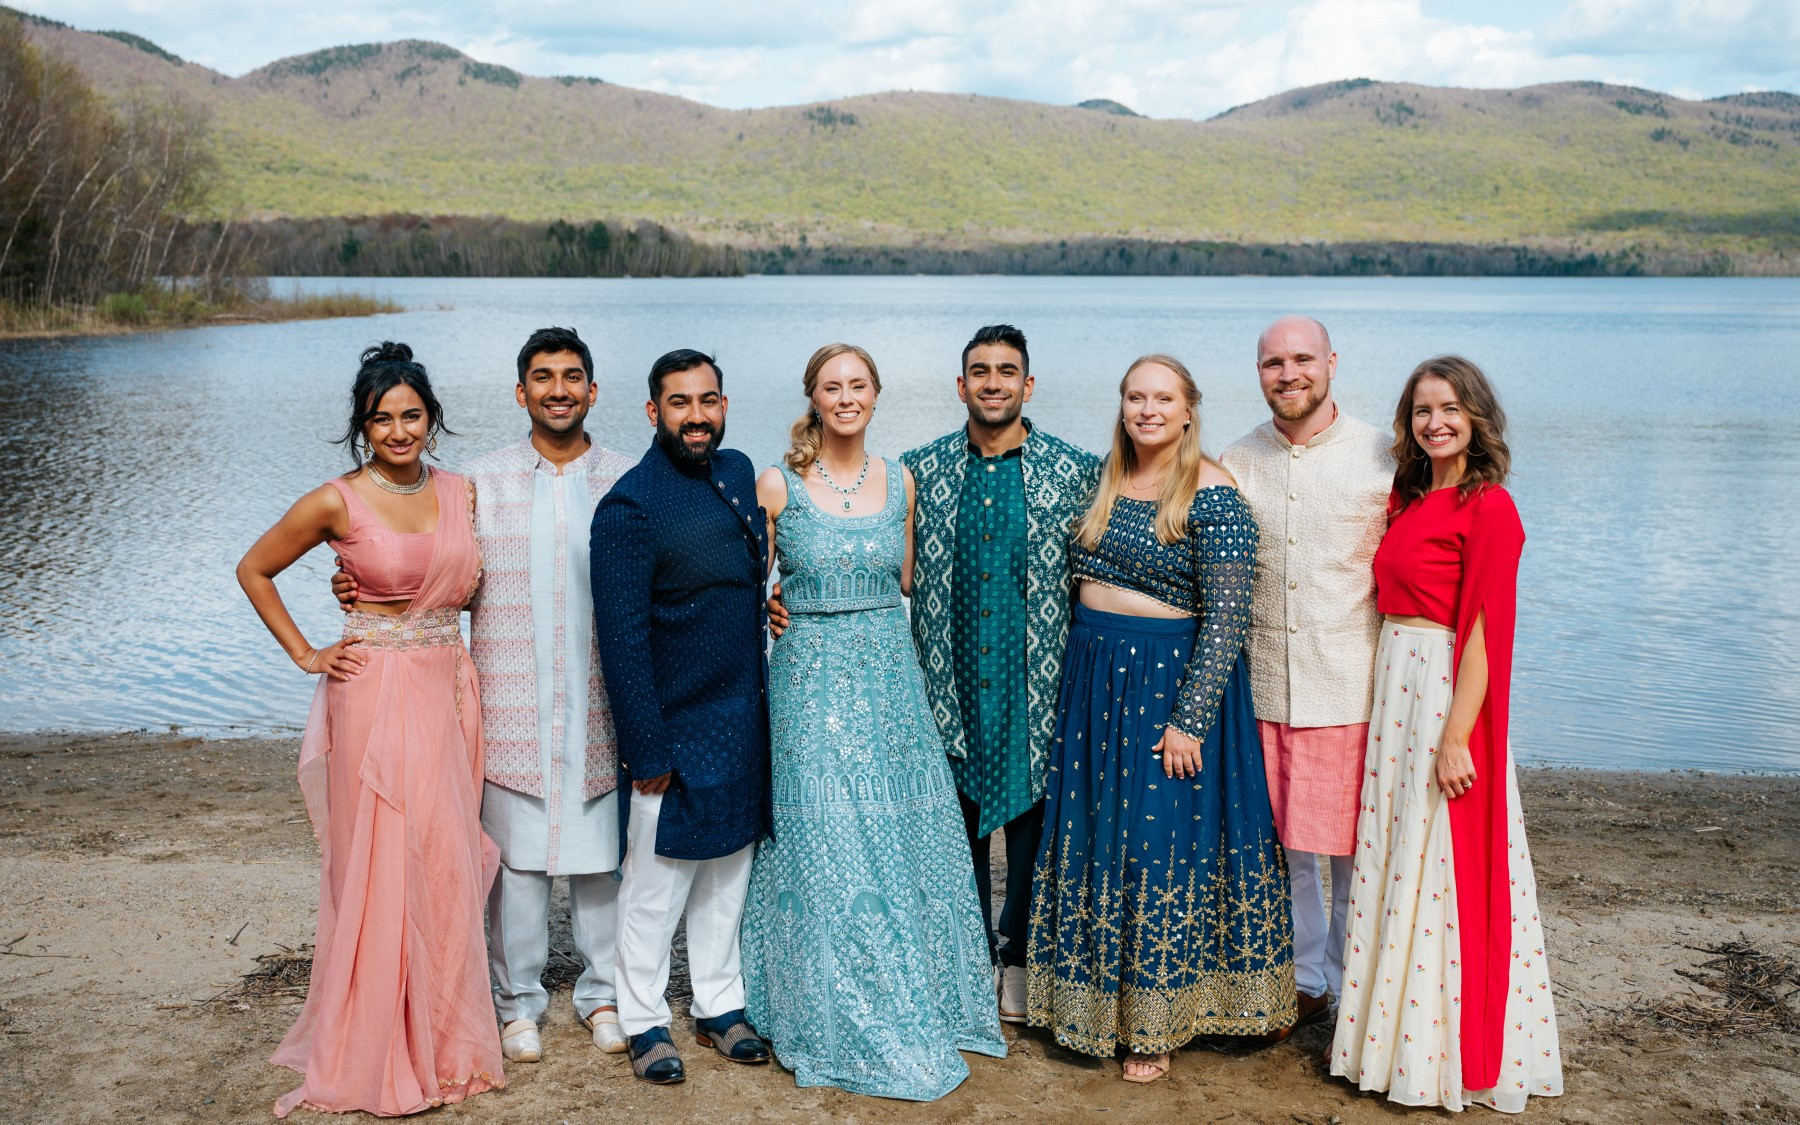 photo of bride and groom with family members in front of lake in indian style garments